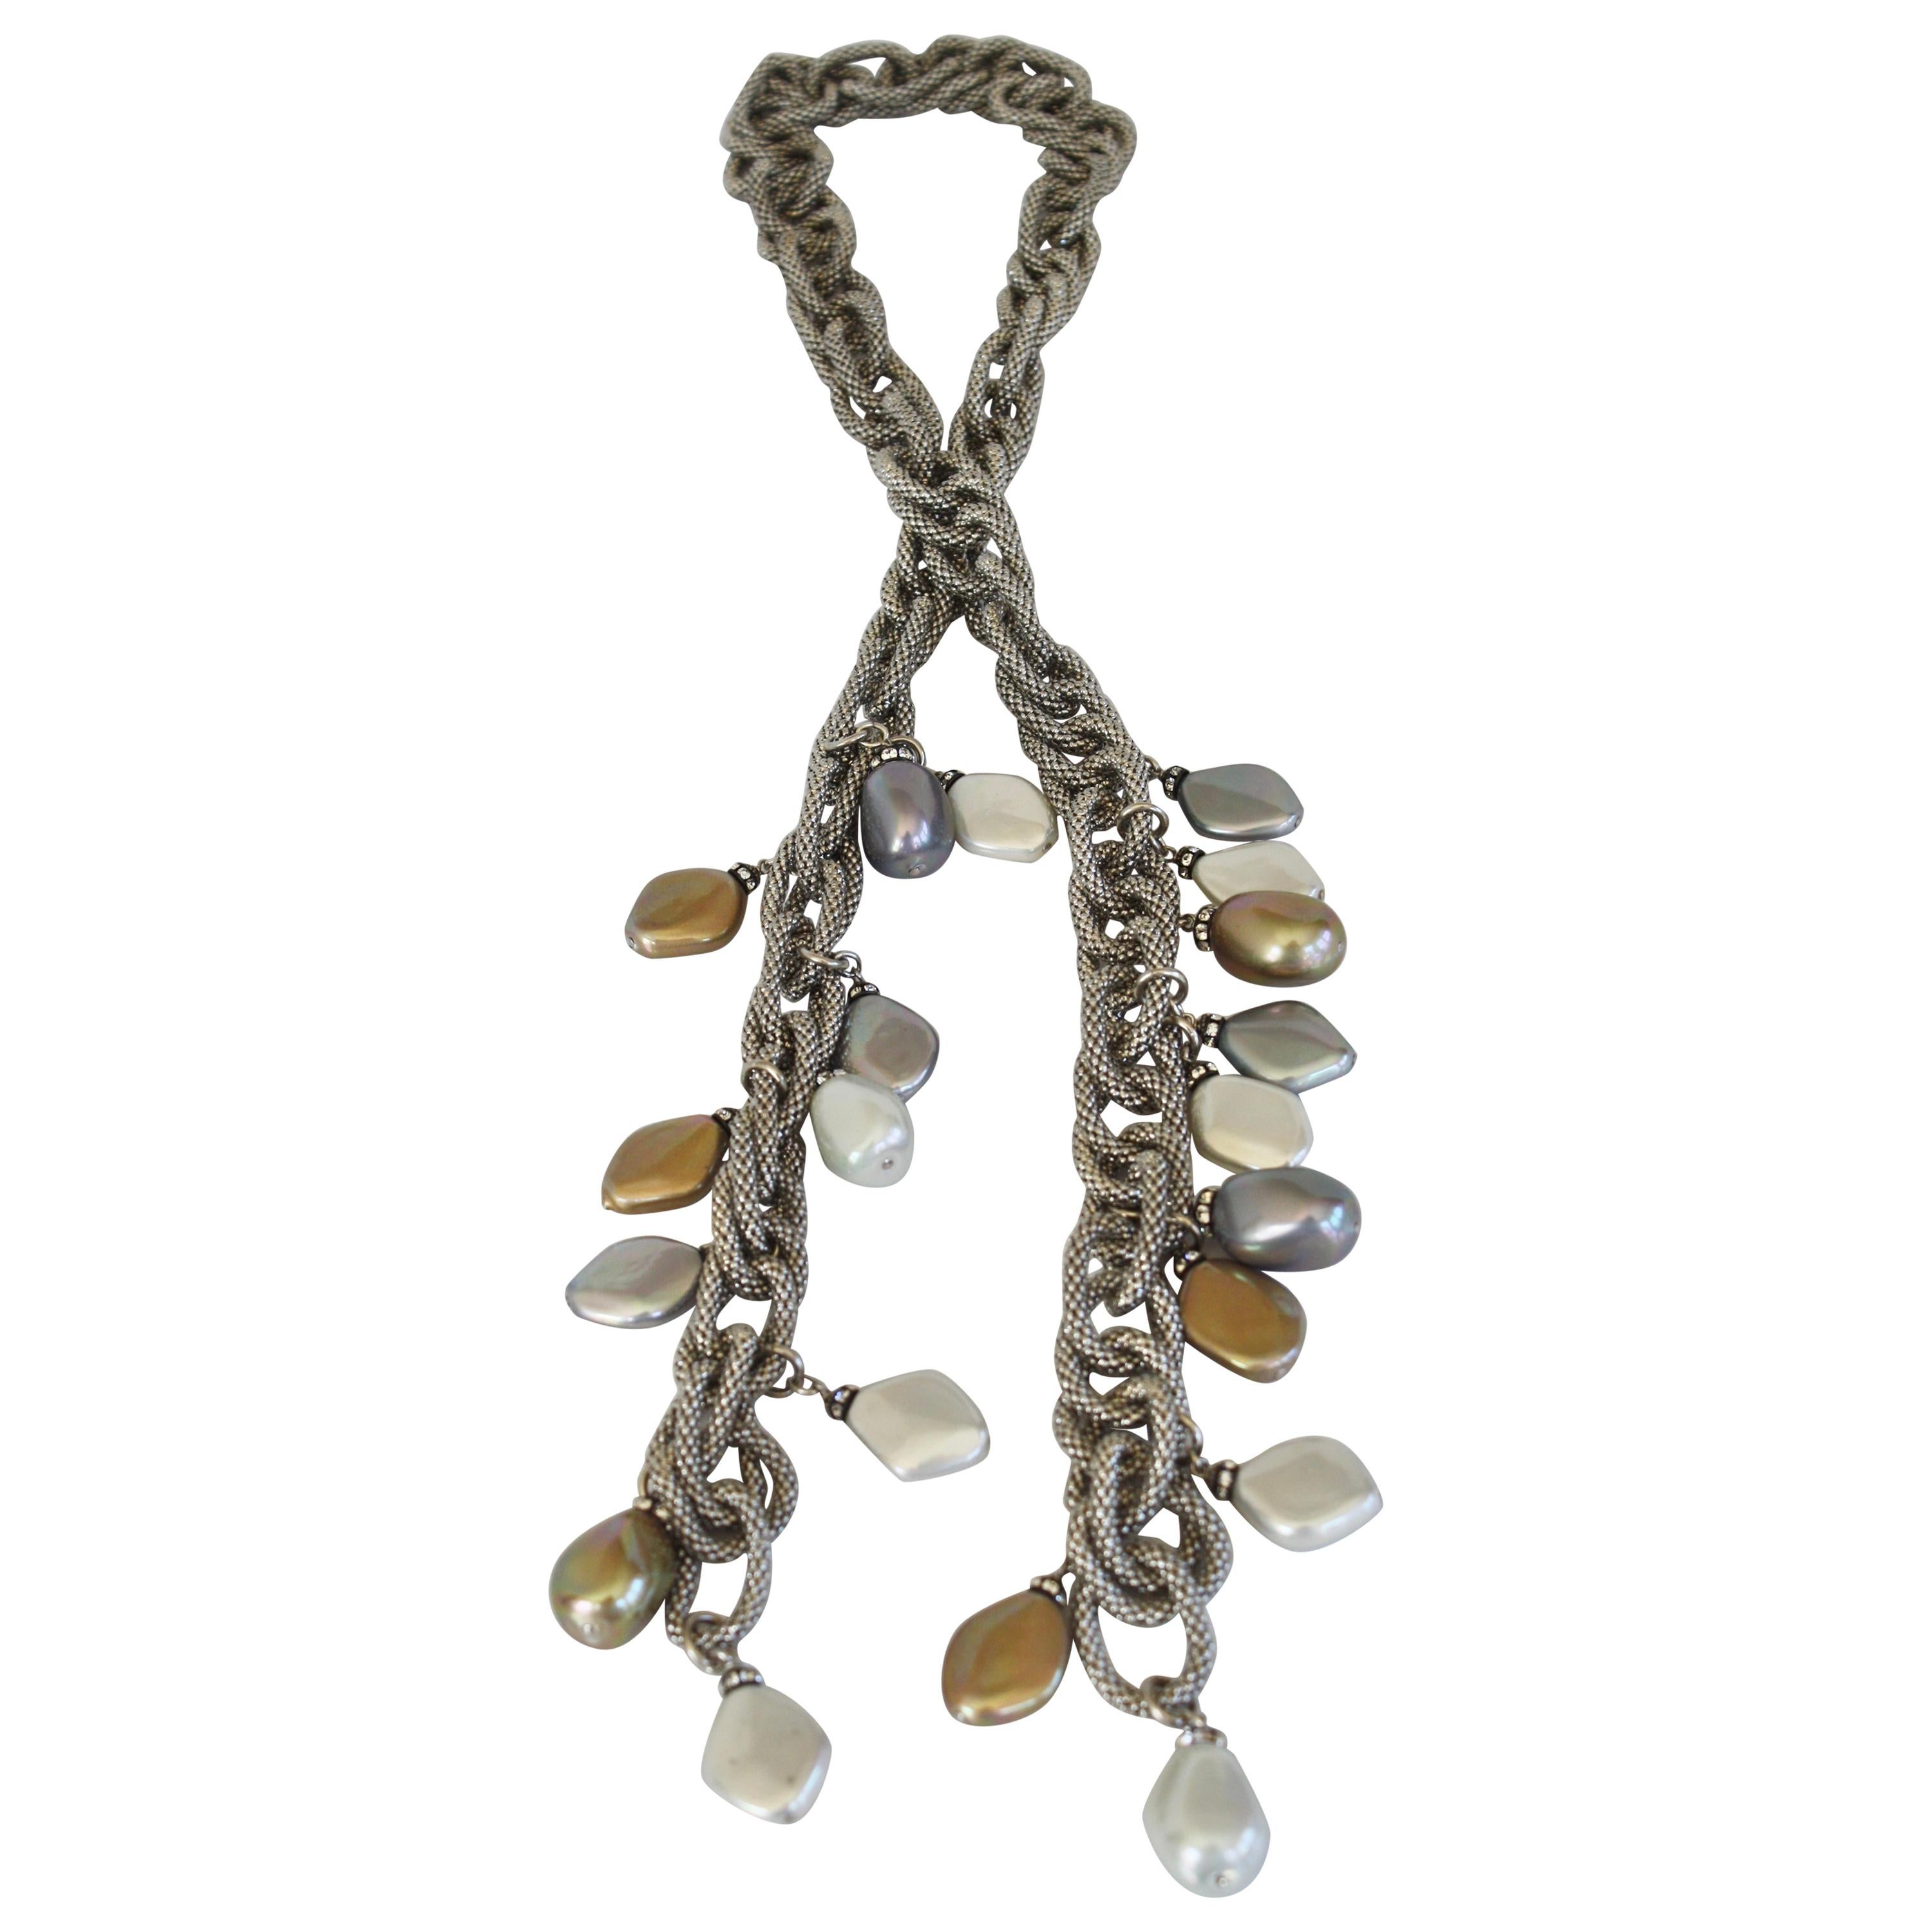 Francoise Montague Silver Chain and Venetian Glass Lariat